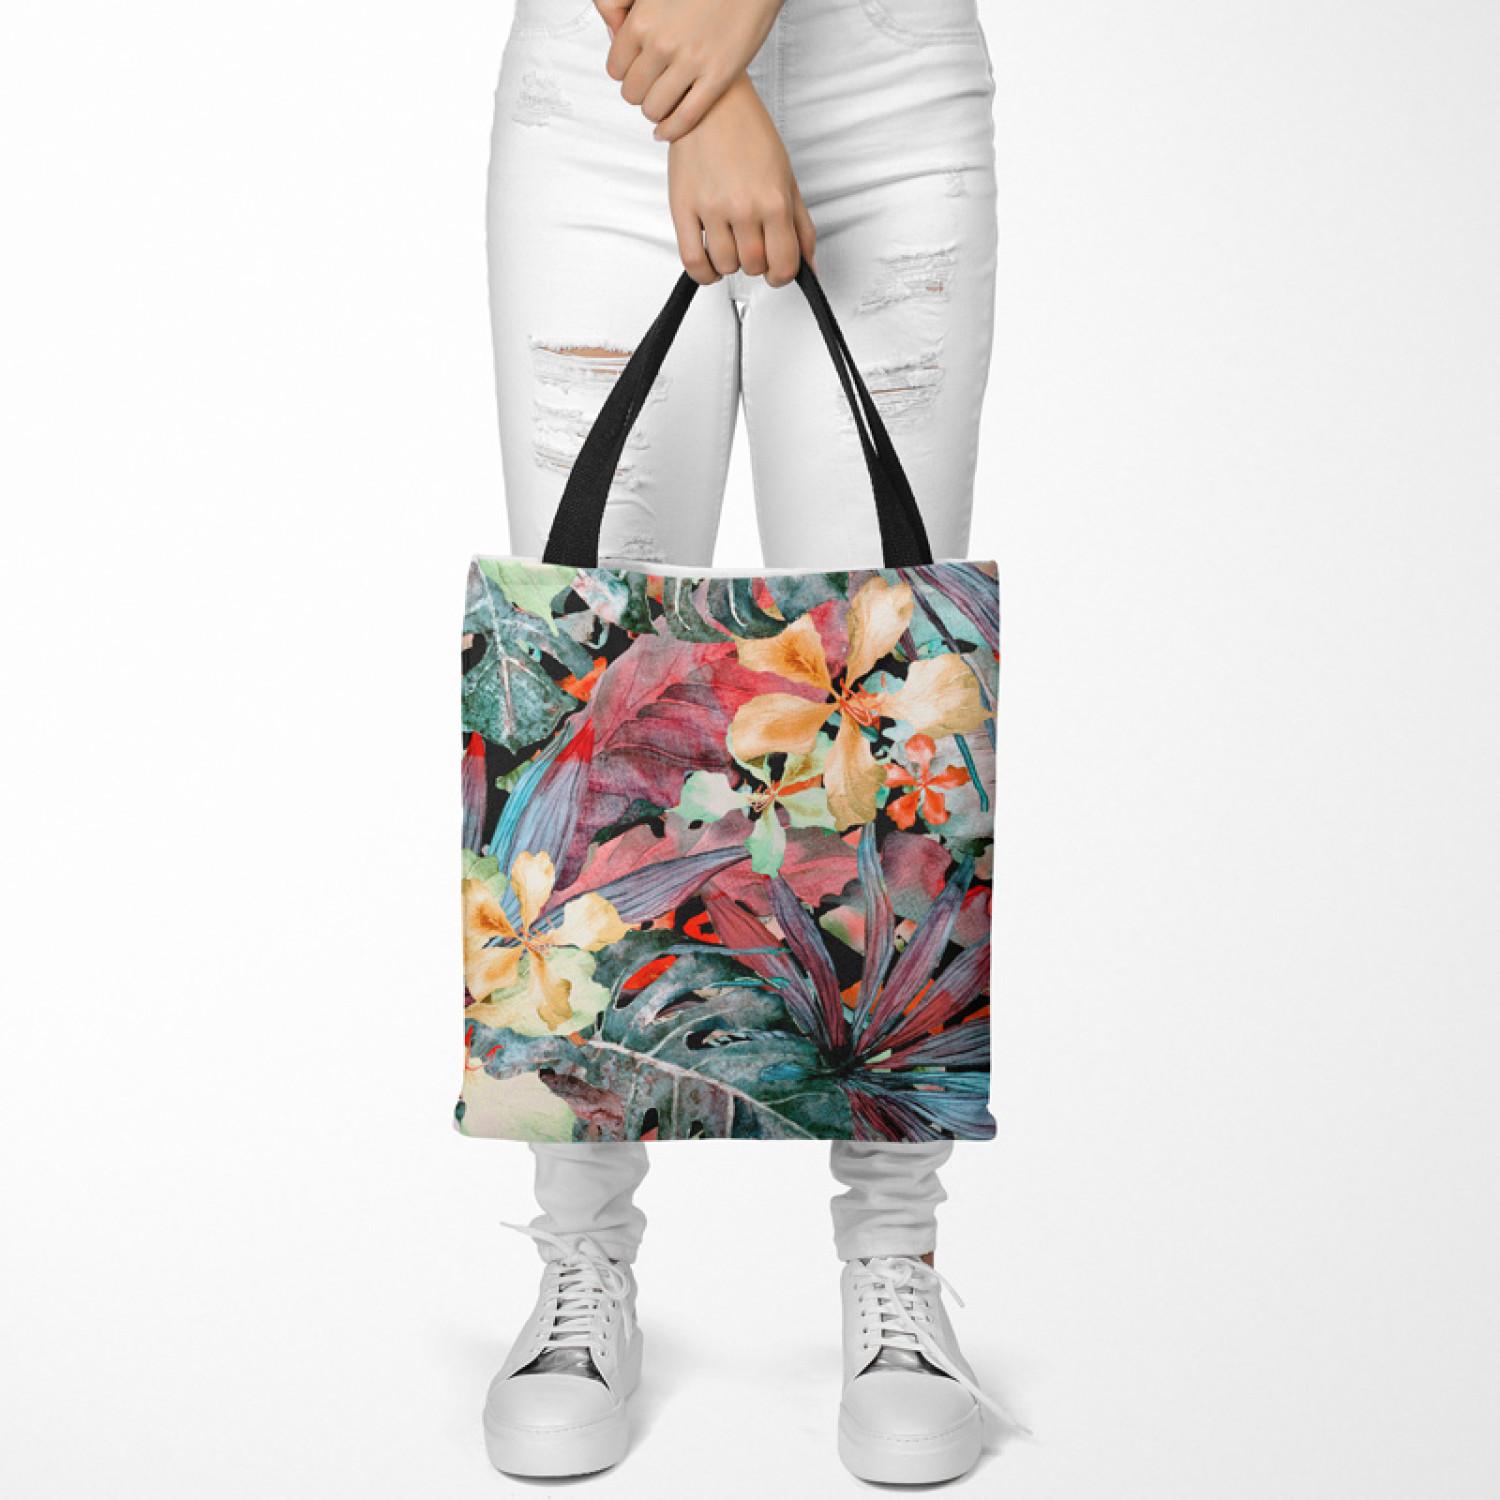 Shopping Bag Coloured leaves - subtle floral pattern in watercolour style